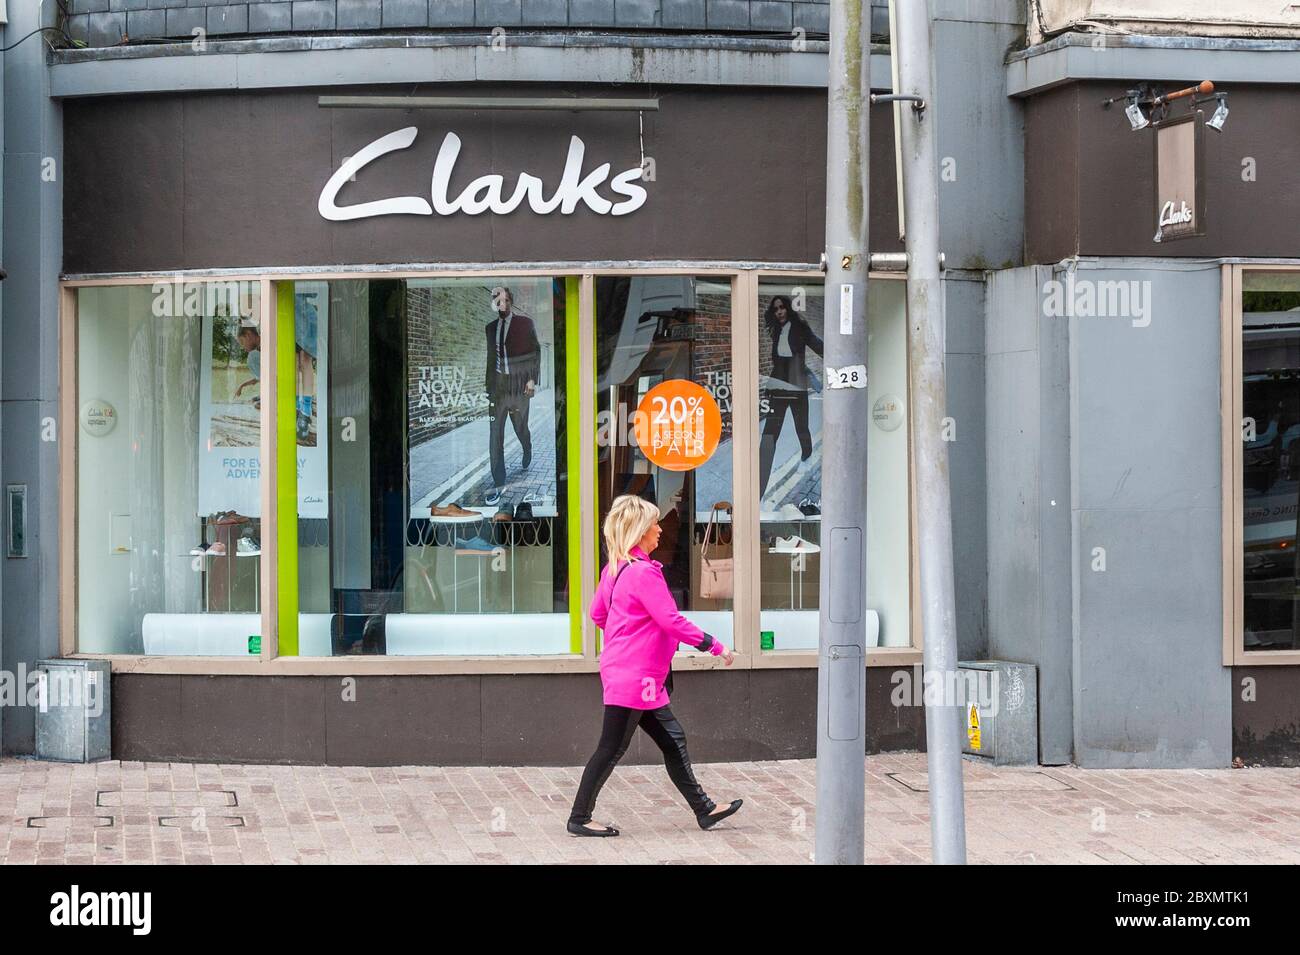 Cork, Ireland. 8th June, 2020. Many shops in Ireland are re-opening today after a 3 month closure due to the Covid-19 pandemic. A woman walks past Clarks Store in Patrick Street. Credit: AG News/Alamy Live News Stock Photo